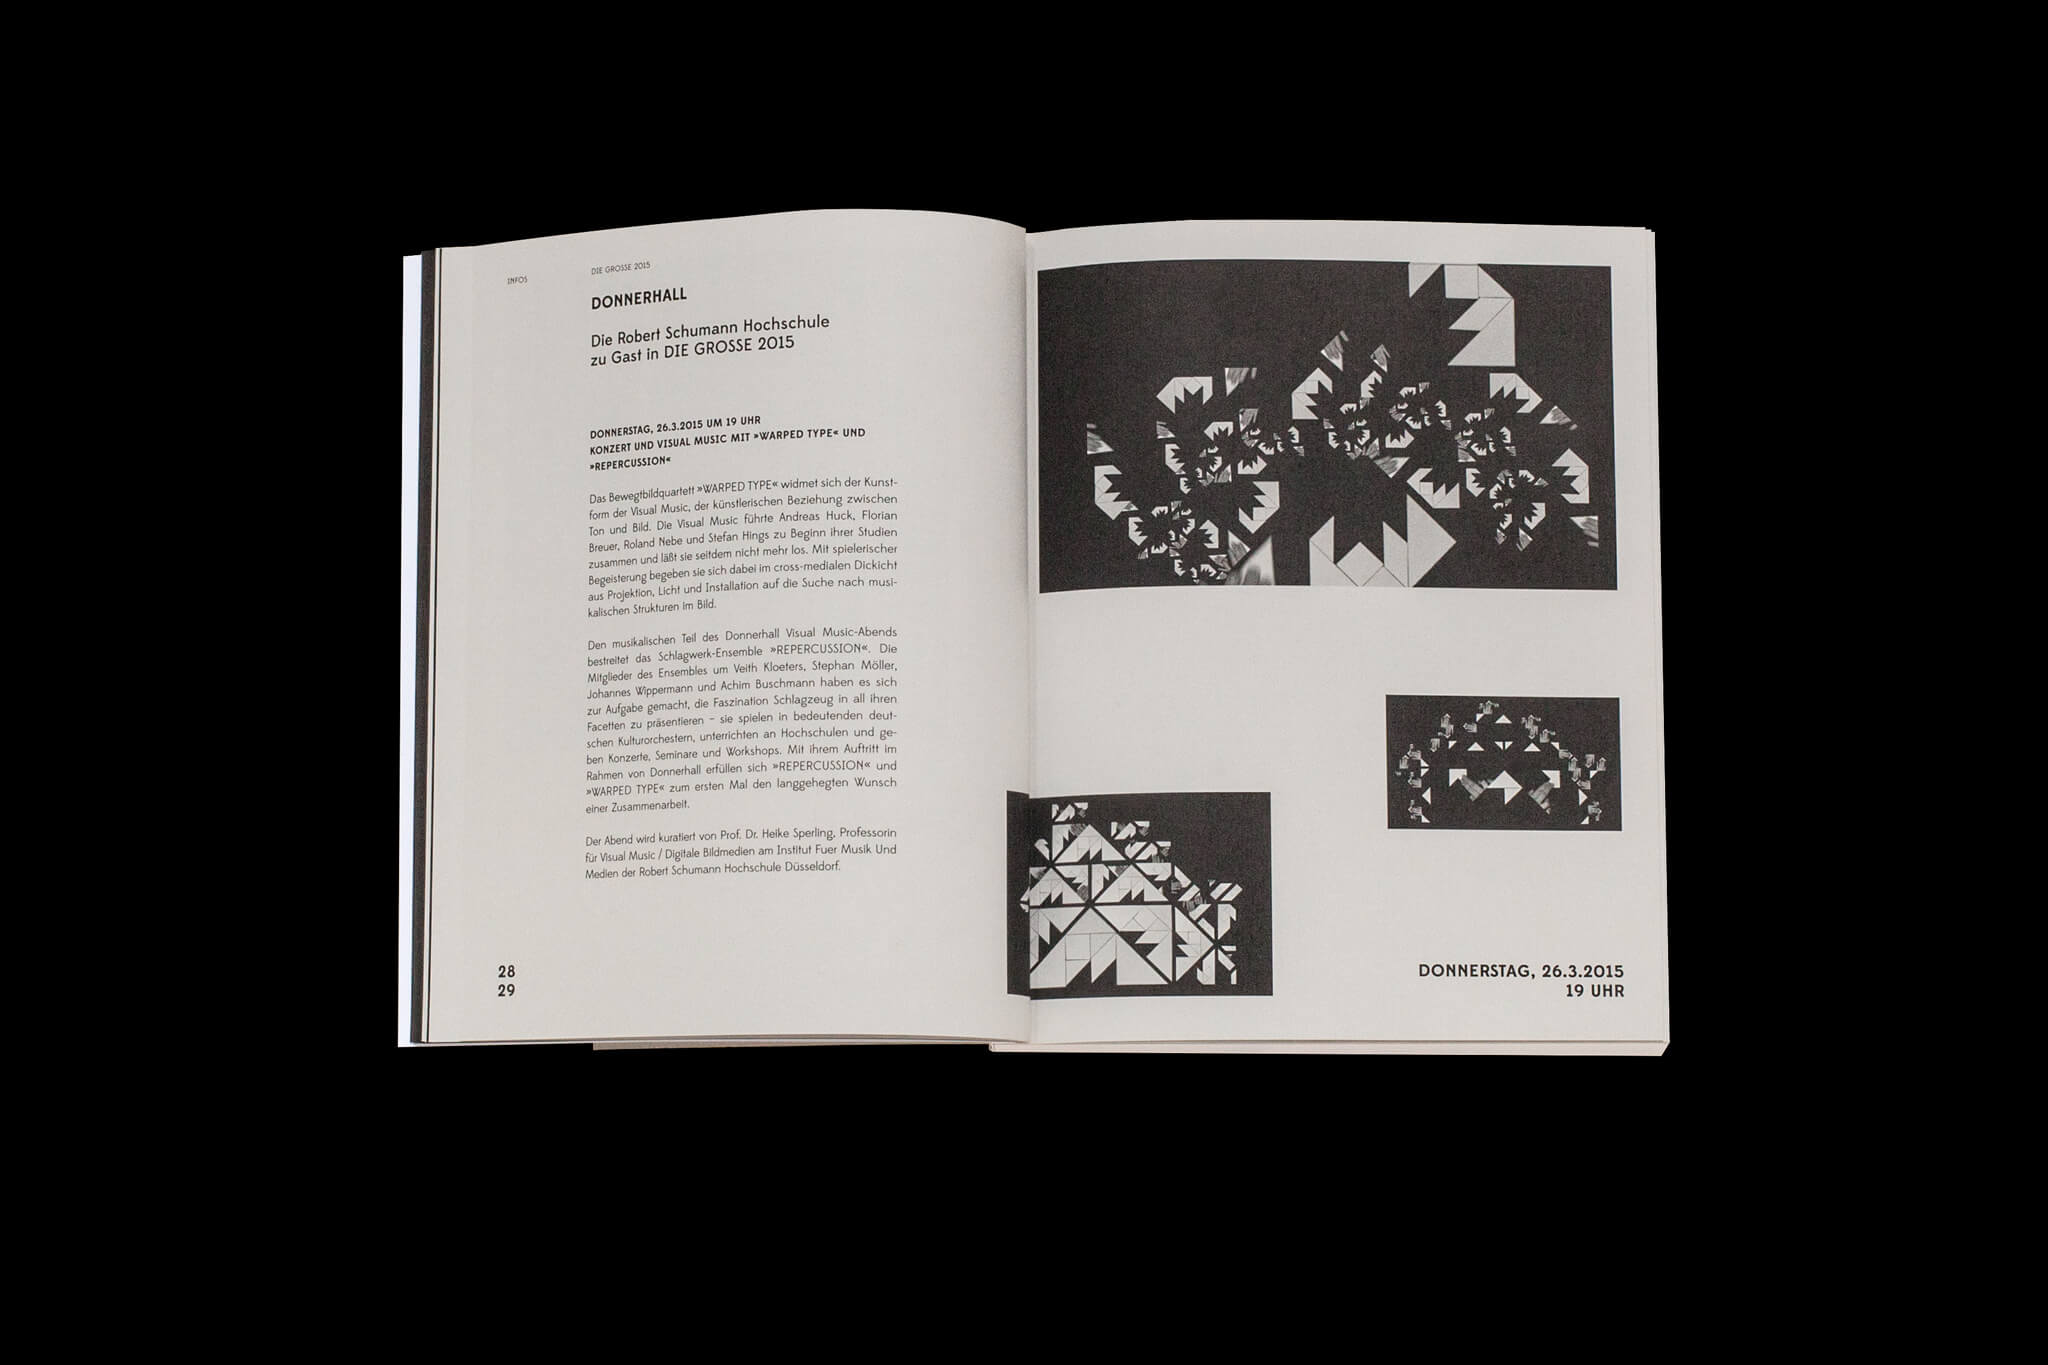 Doppelseite Kunstkatalog mit Text und Fotografie / Double page art catalog with text and photography